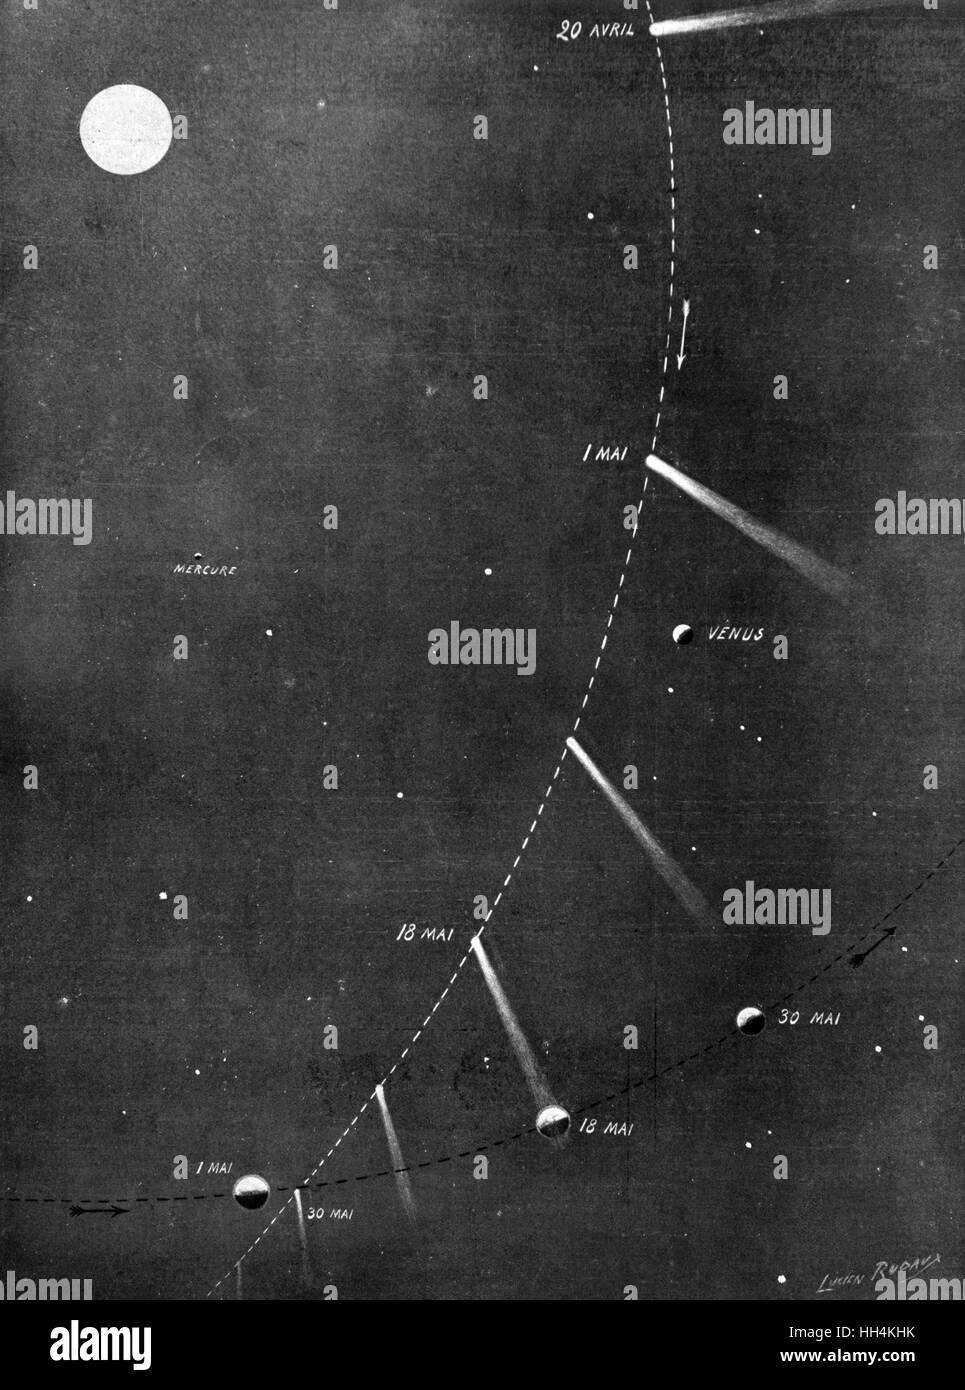 The course of Halley's Comet across the night sky through April and May, 1910. The next predicted perihelion of Halley's Comet is 28 July 2061 Stock Photo